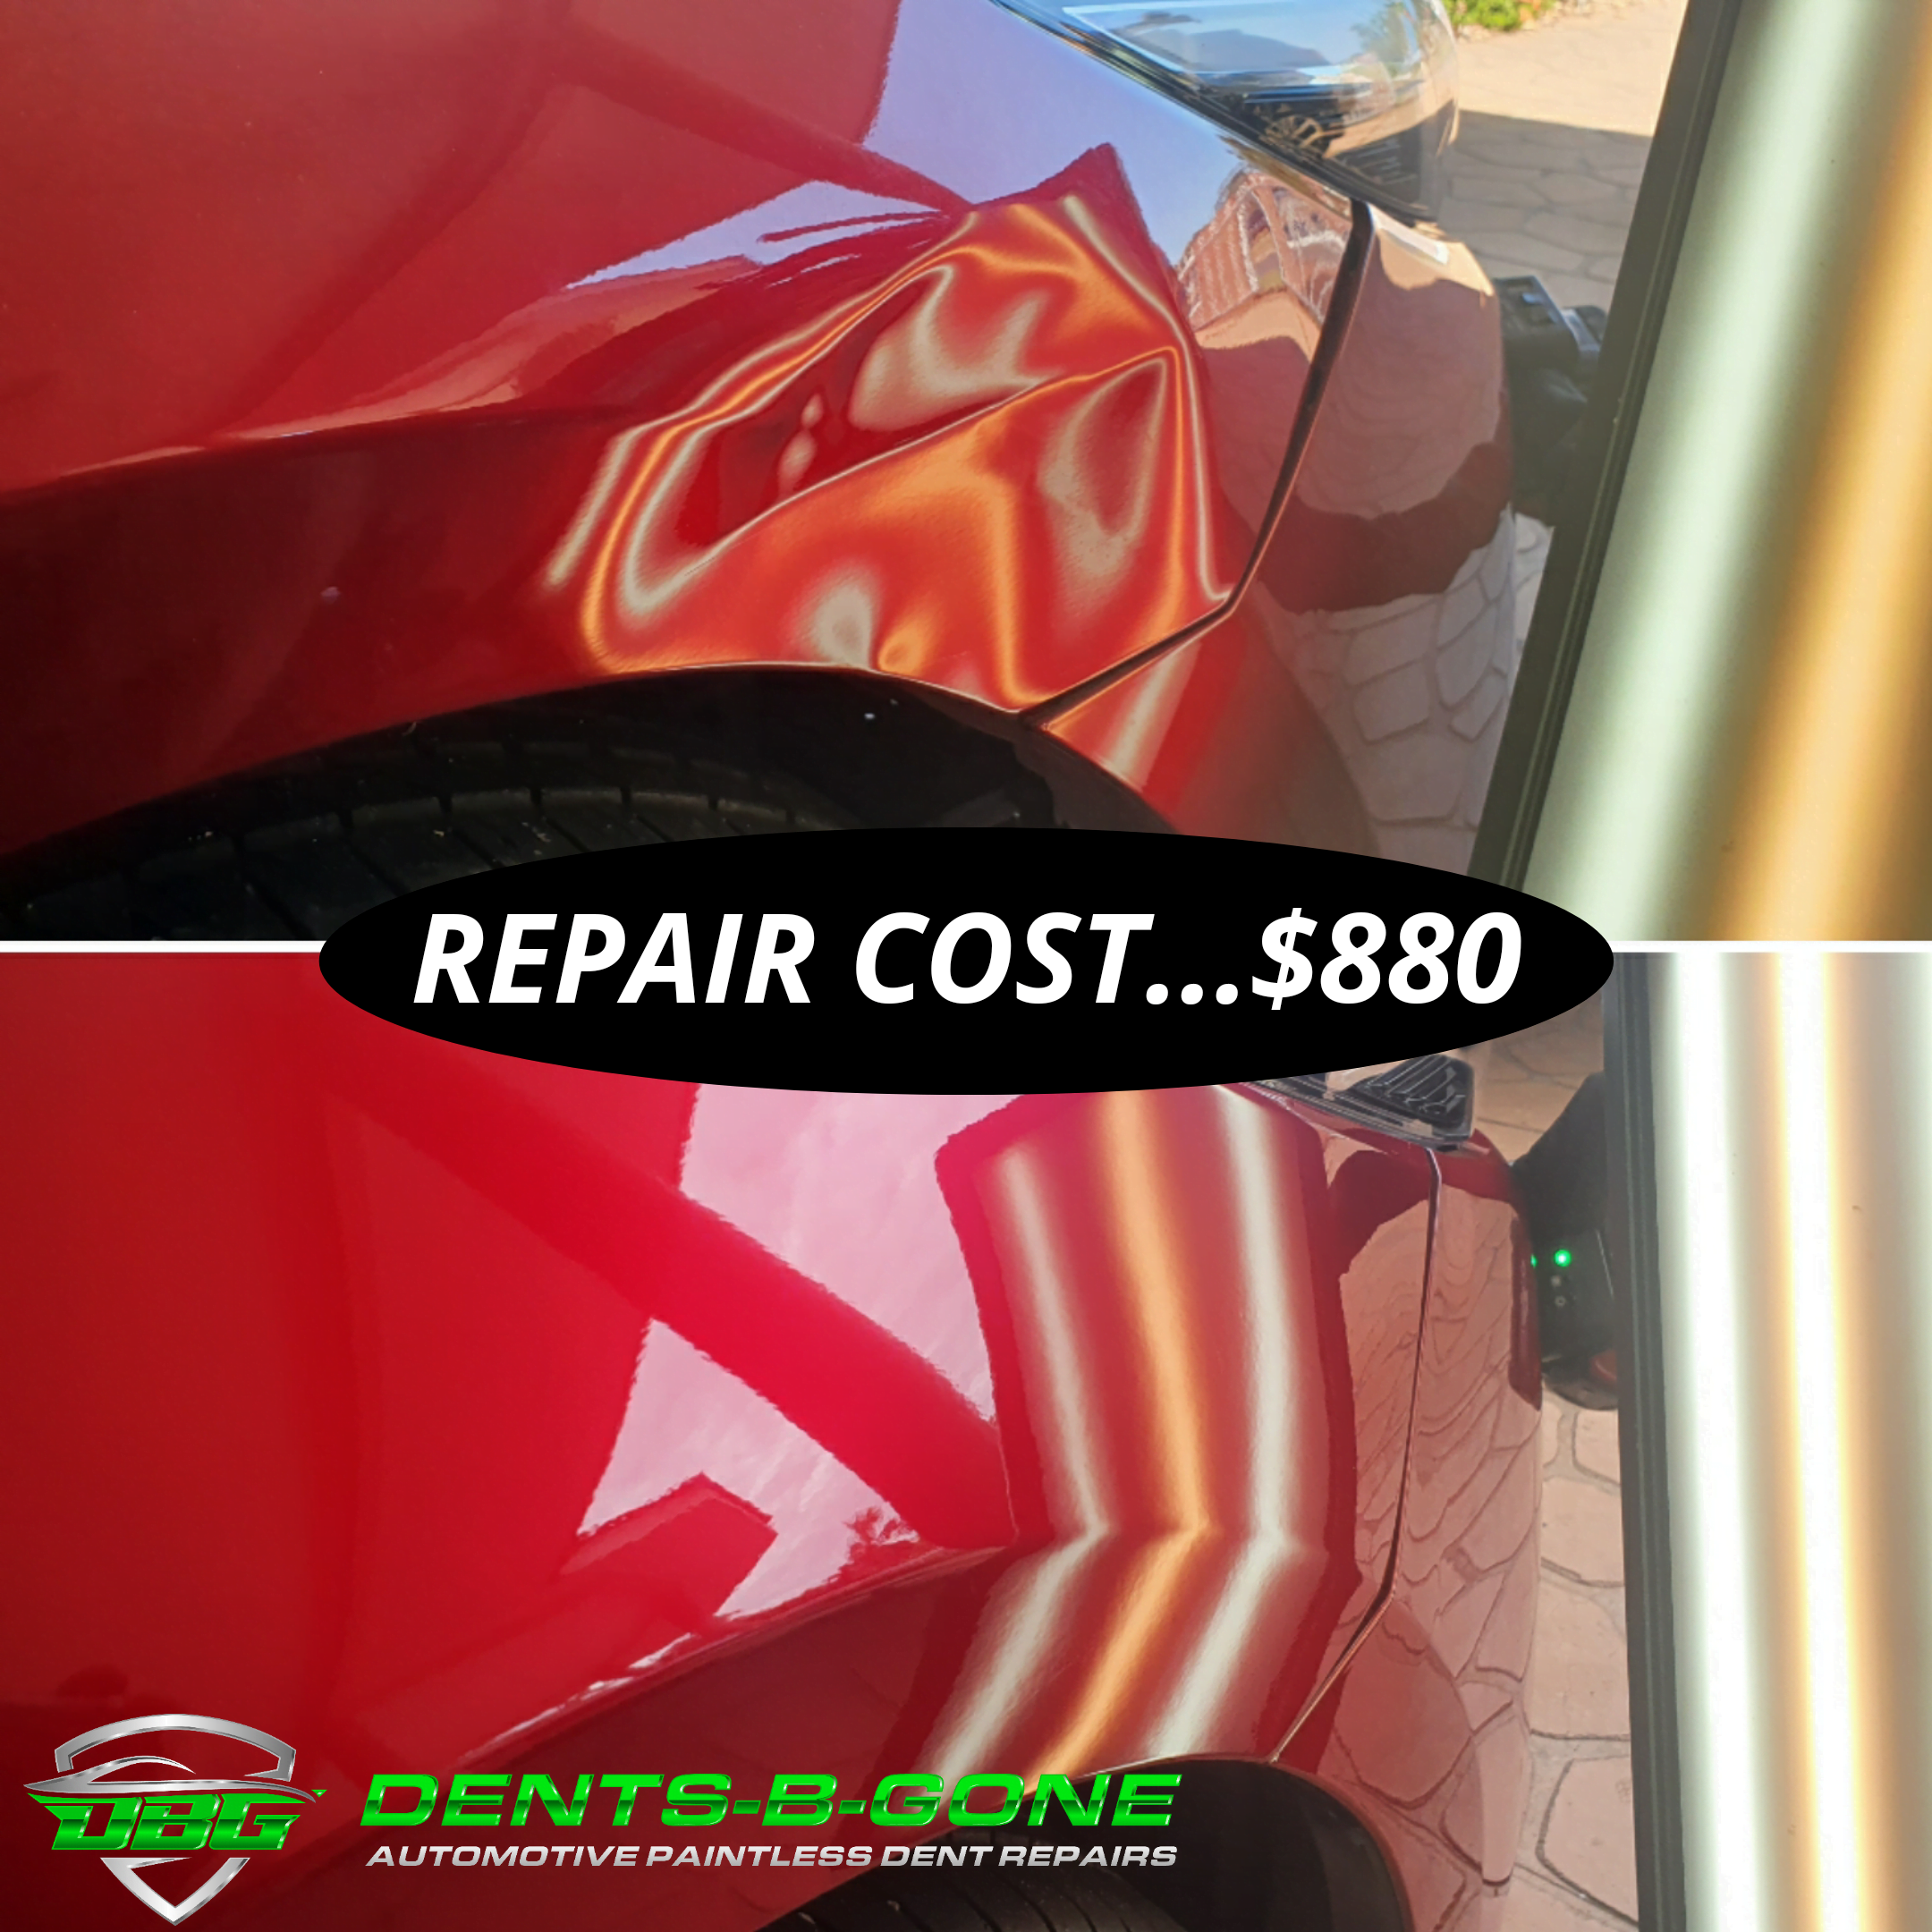 Learn More About Paintless Dent Repair Pricing Guide thumbnail